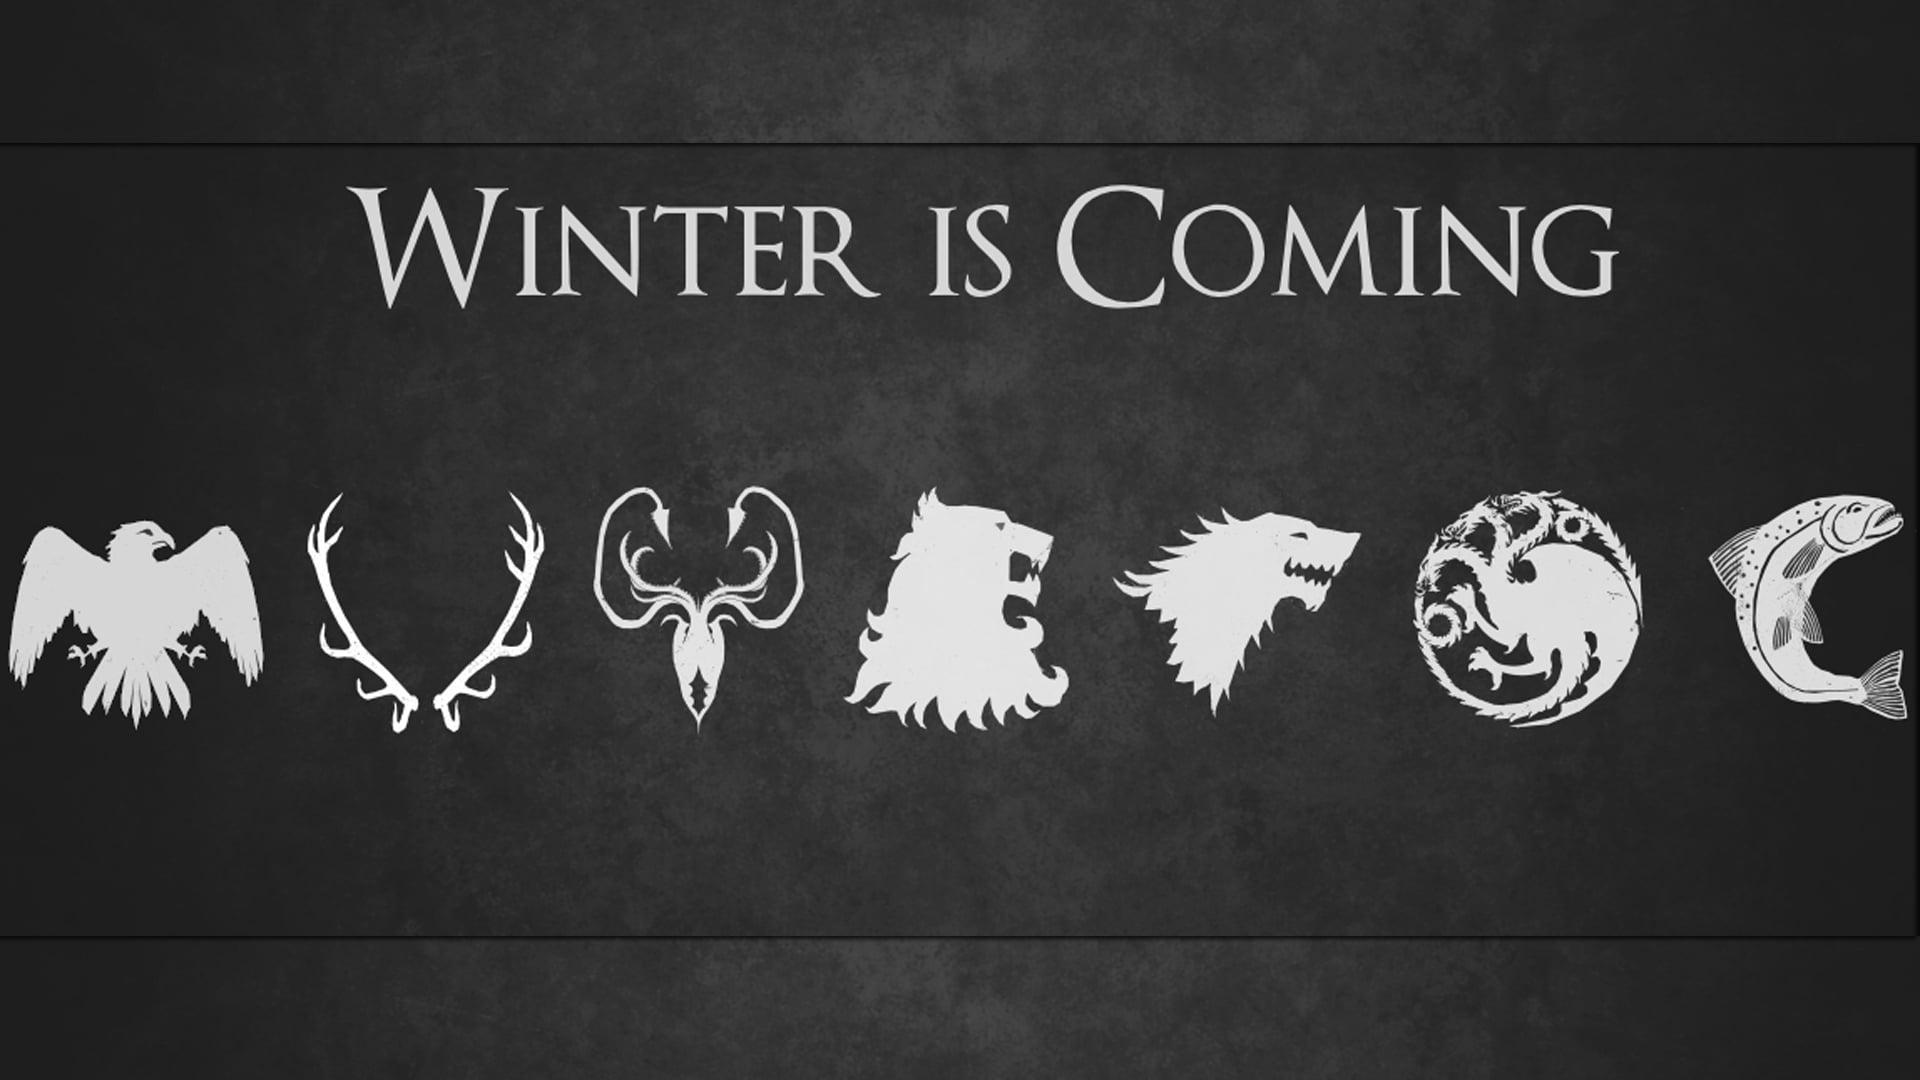 Winter is coming illustration, Game of Thrones, sigils